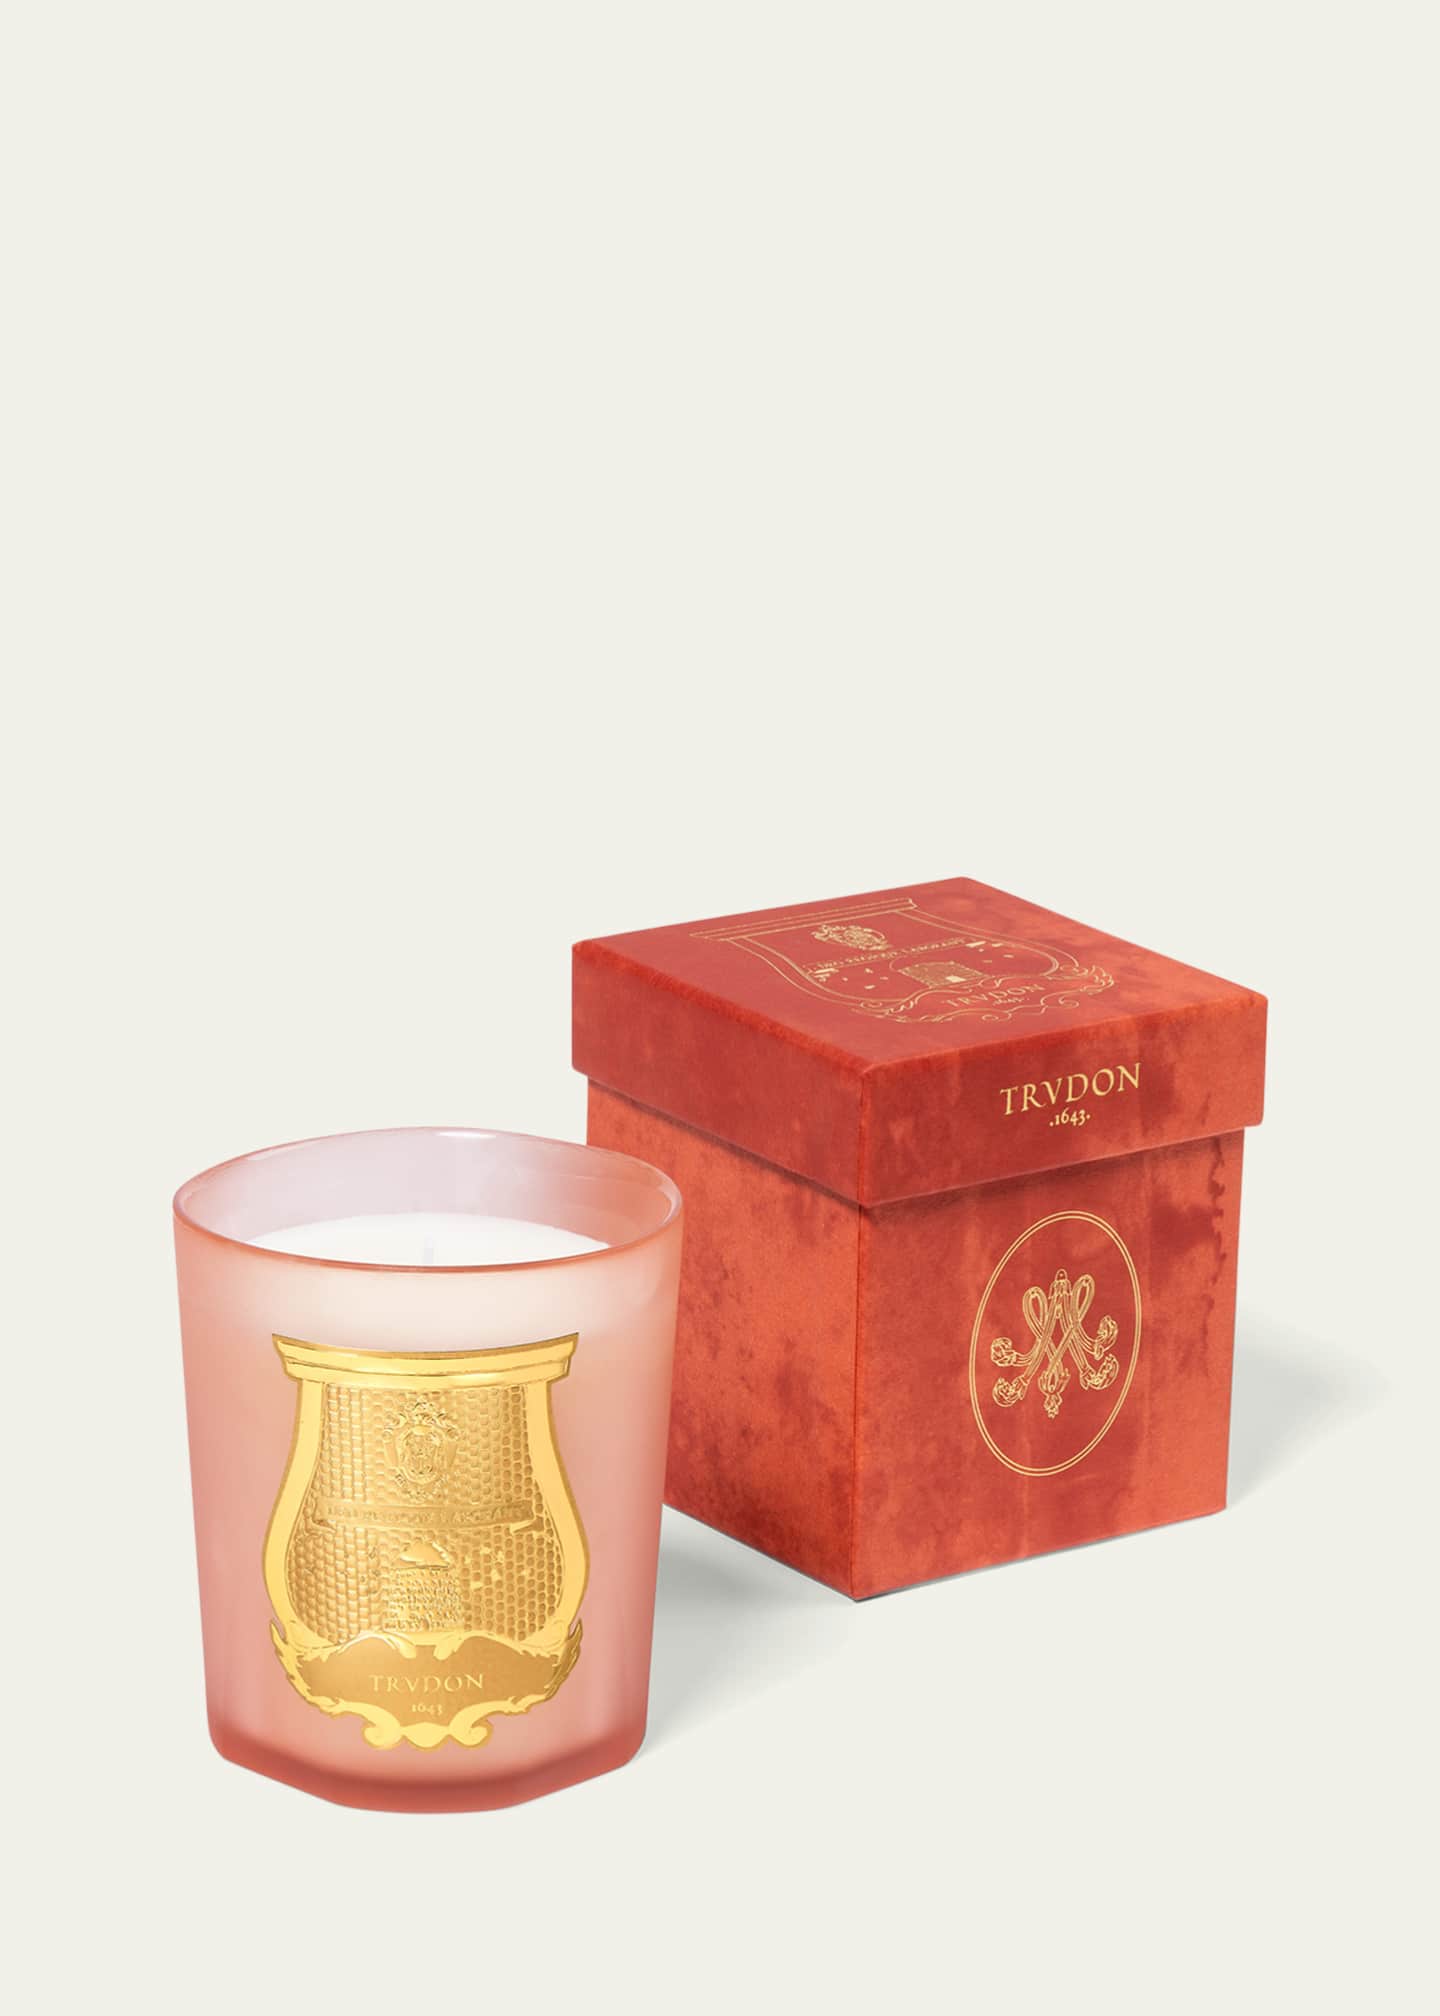 Trudon Tuileries Scented Candle, 9.5 oz. - Bergdorf Goodman